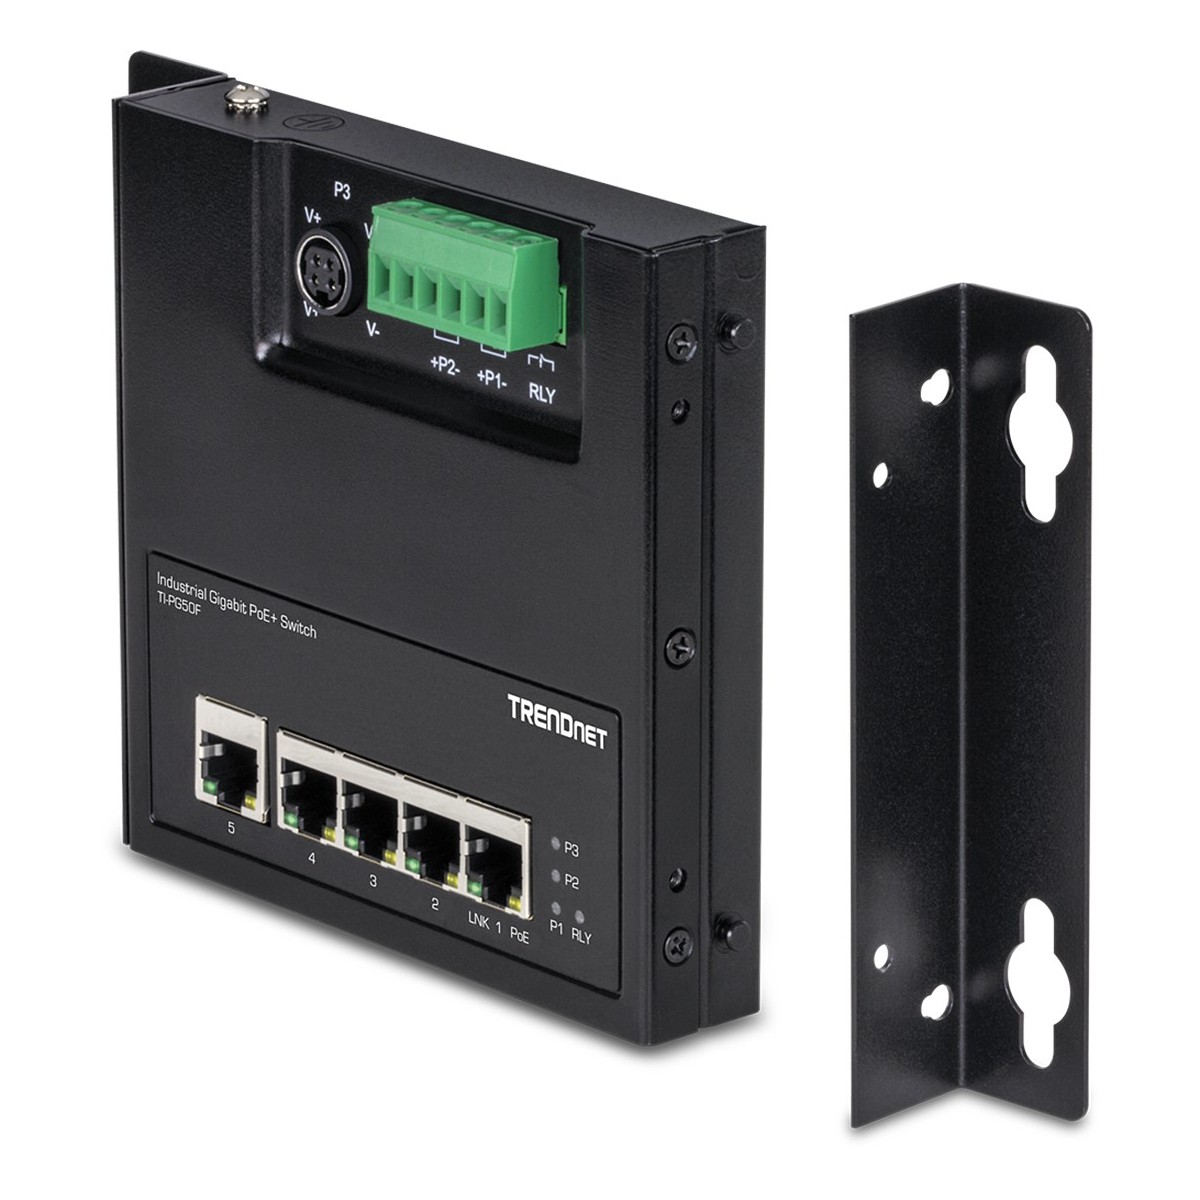 TRENDnet TI-PG50F - Managed - Power over Ethernet (PoE) - Rack mounting